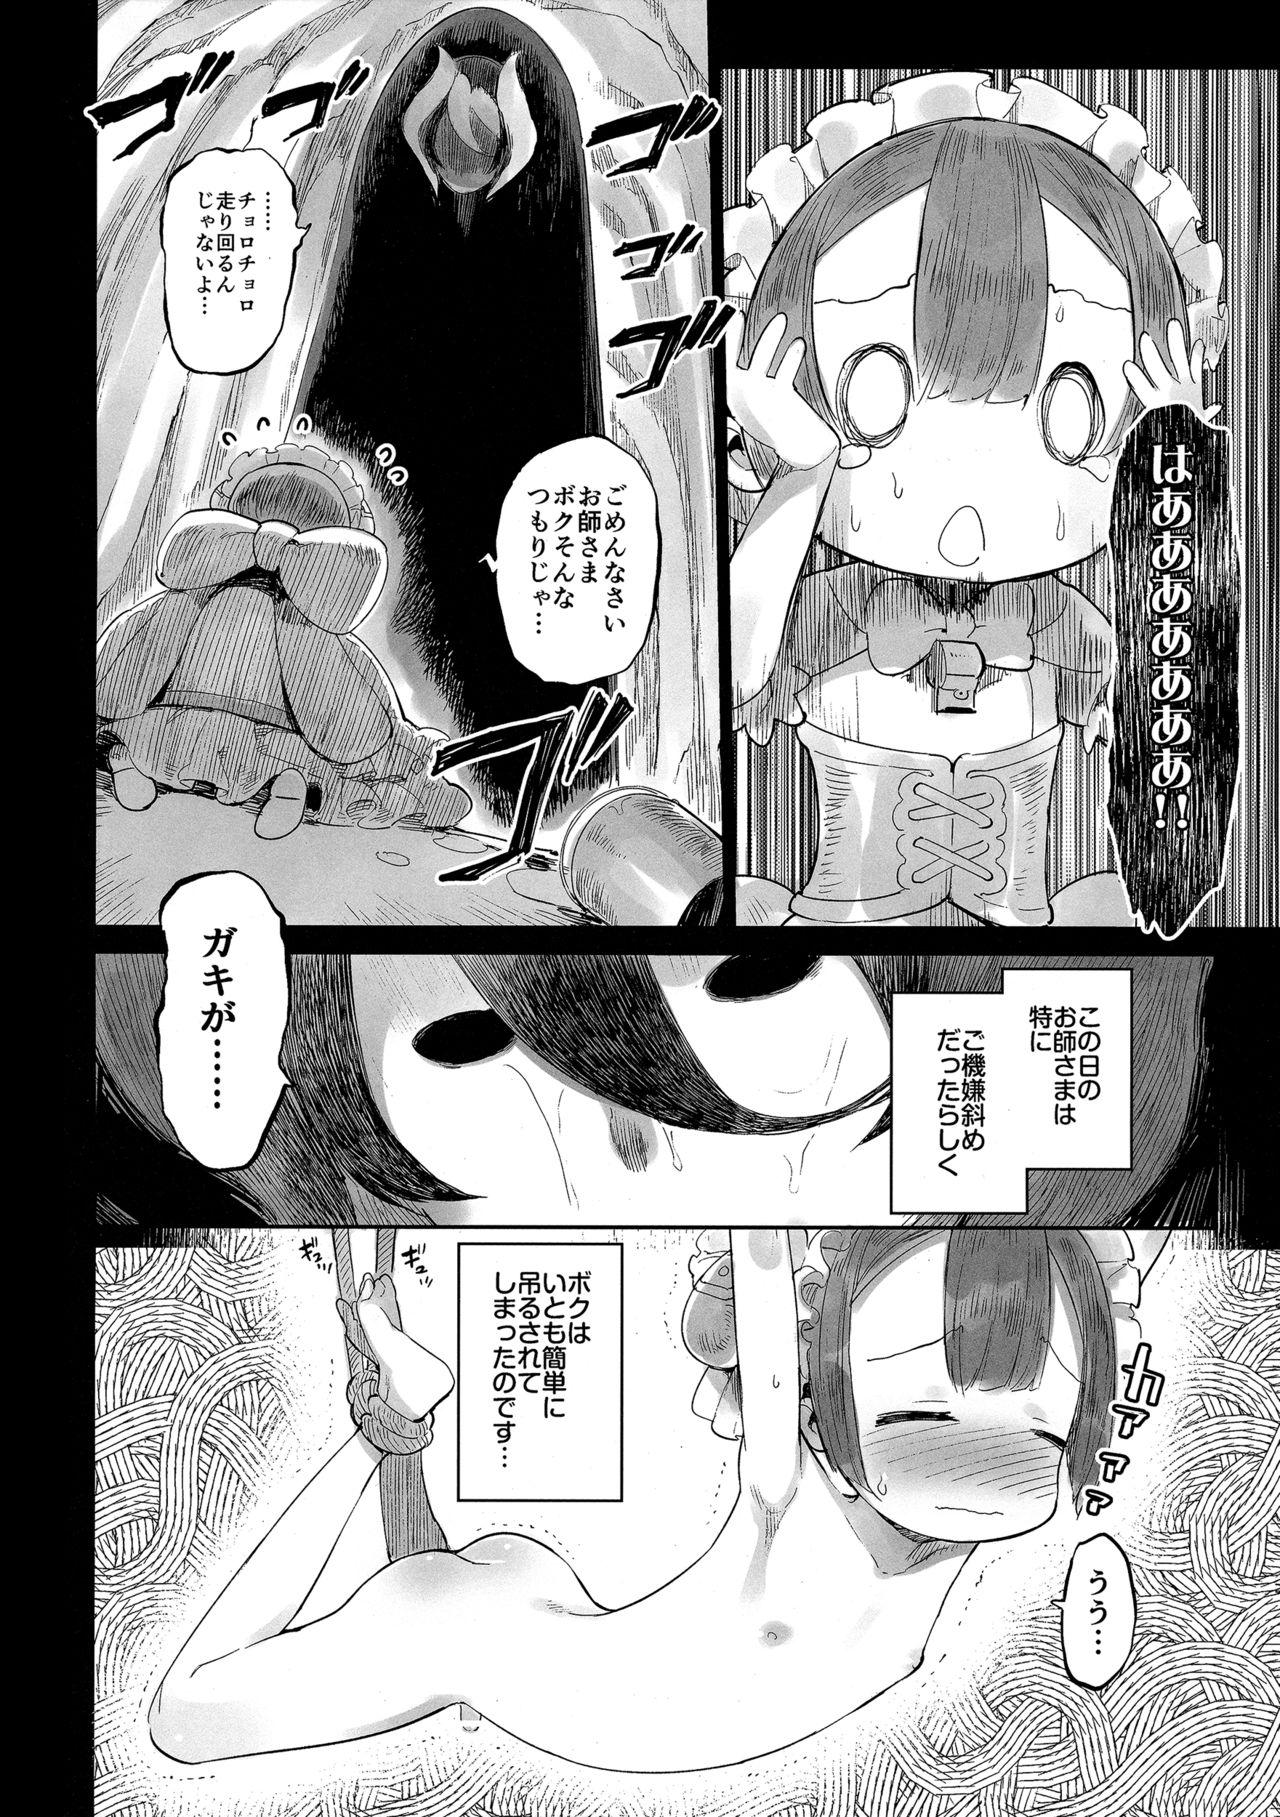 Moneytalks Doshigatai Shitei - Made in abyss 18 Porn - Page 3